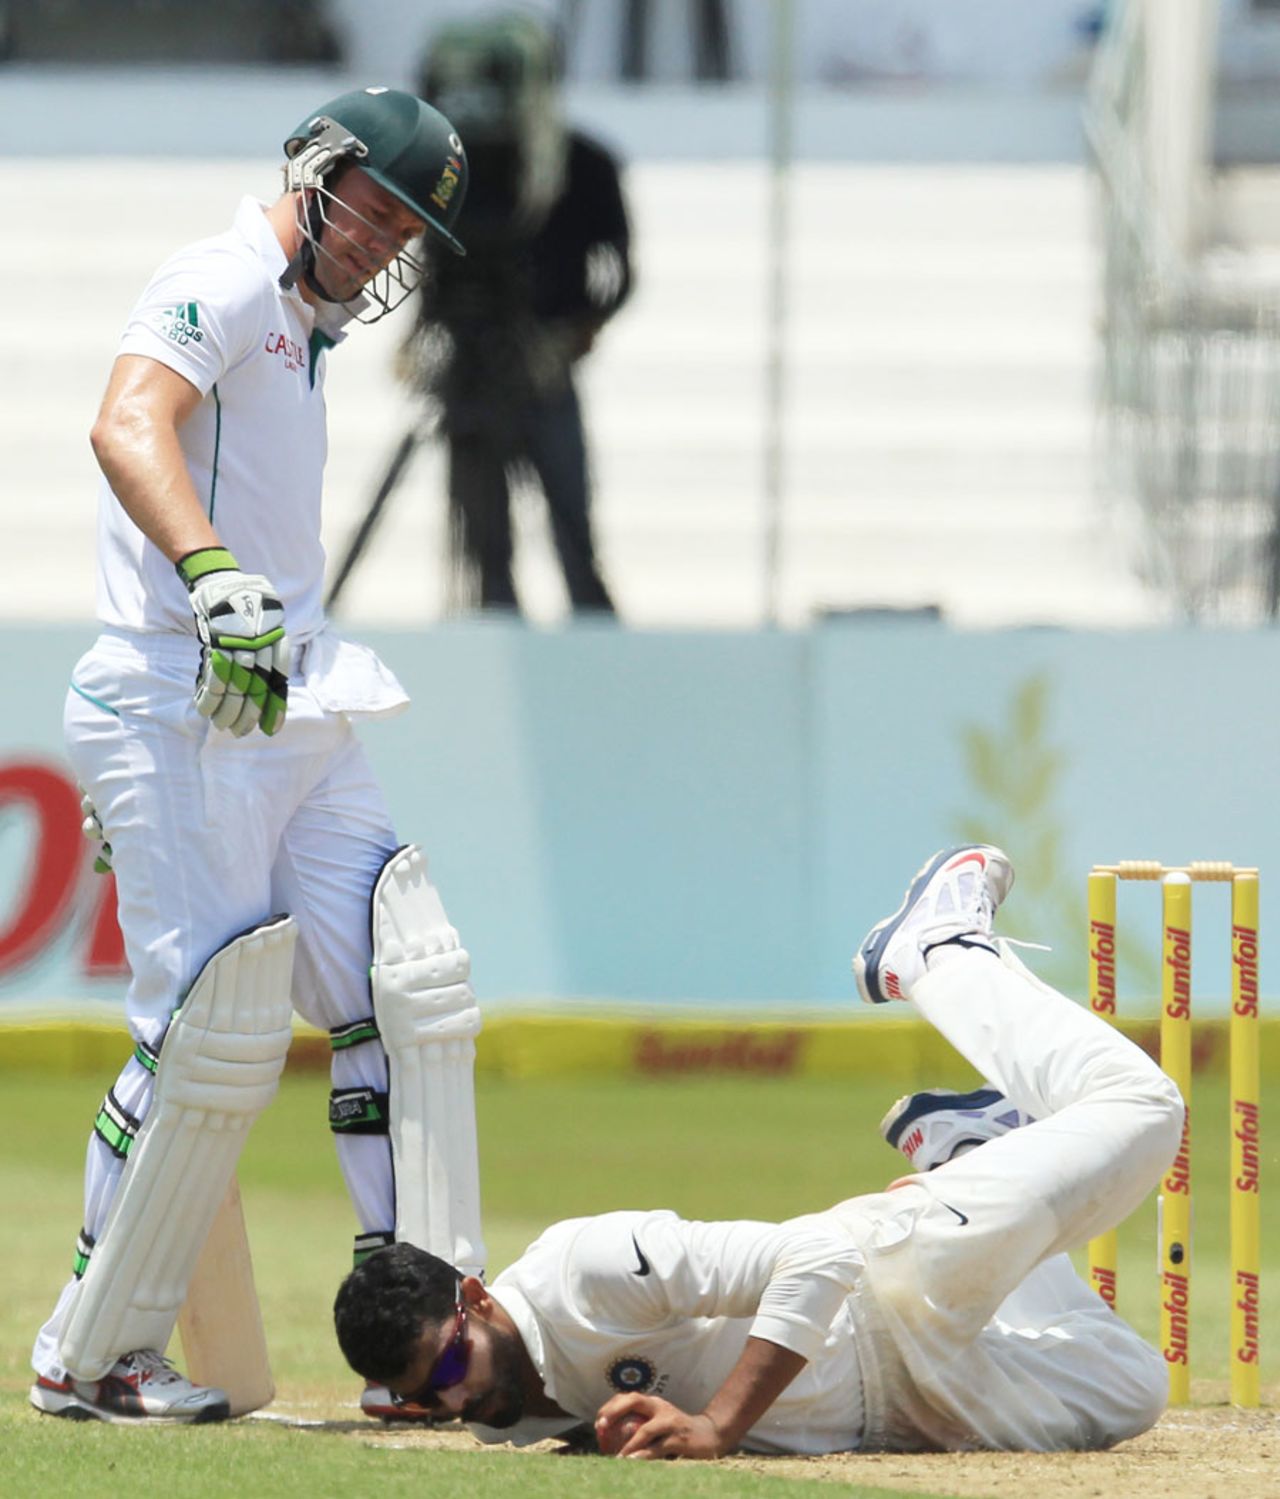 Ravindra Jadeja falls after attempting a catch, South Africa v India, 2nd Test, Durban, 3rd day, December 28, 2013